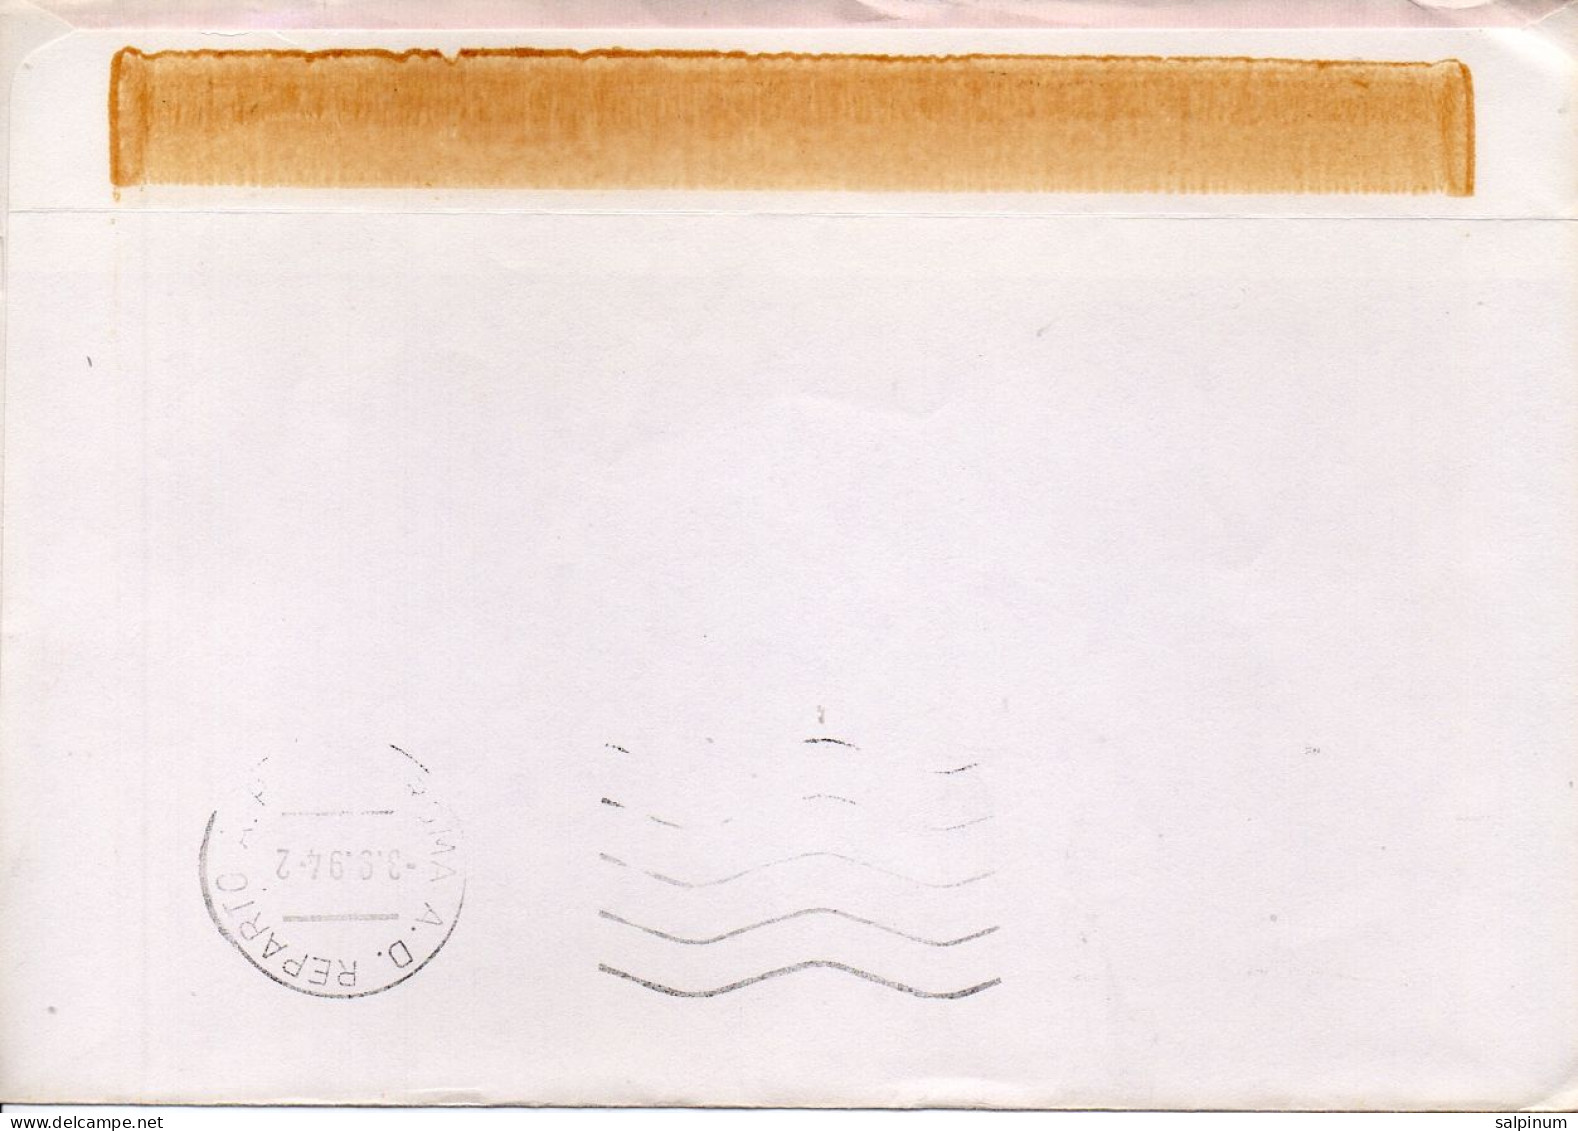 Philatelic Envelope With Stamps Sent From DENMARK To ITALY - Briefe U. Dokumente